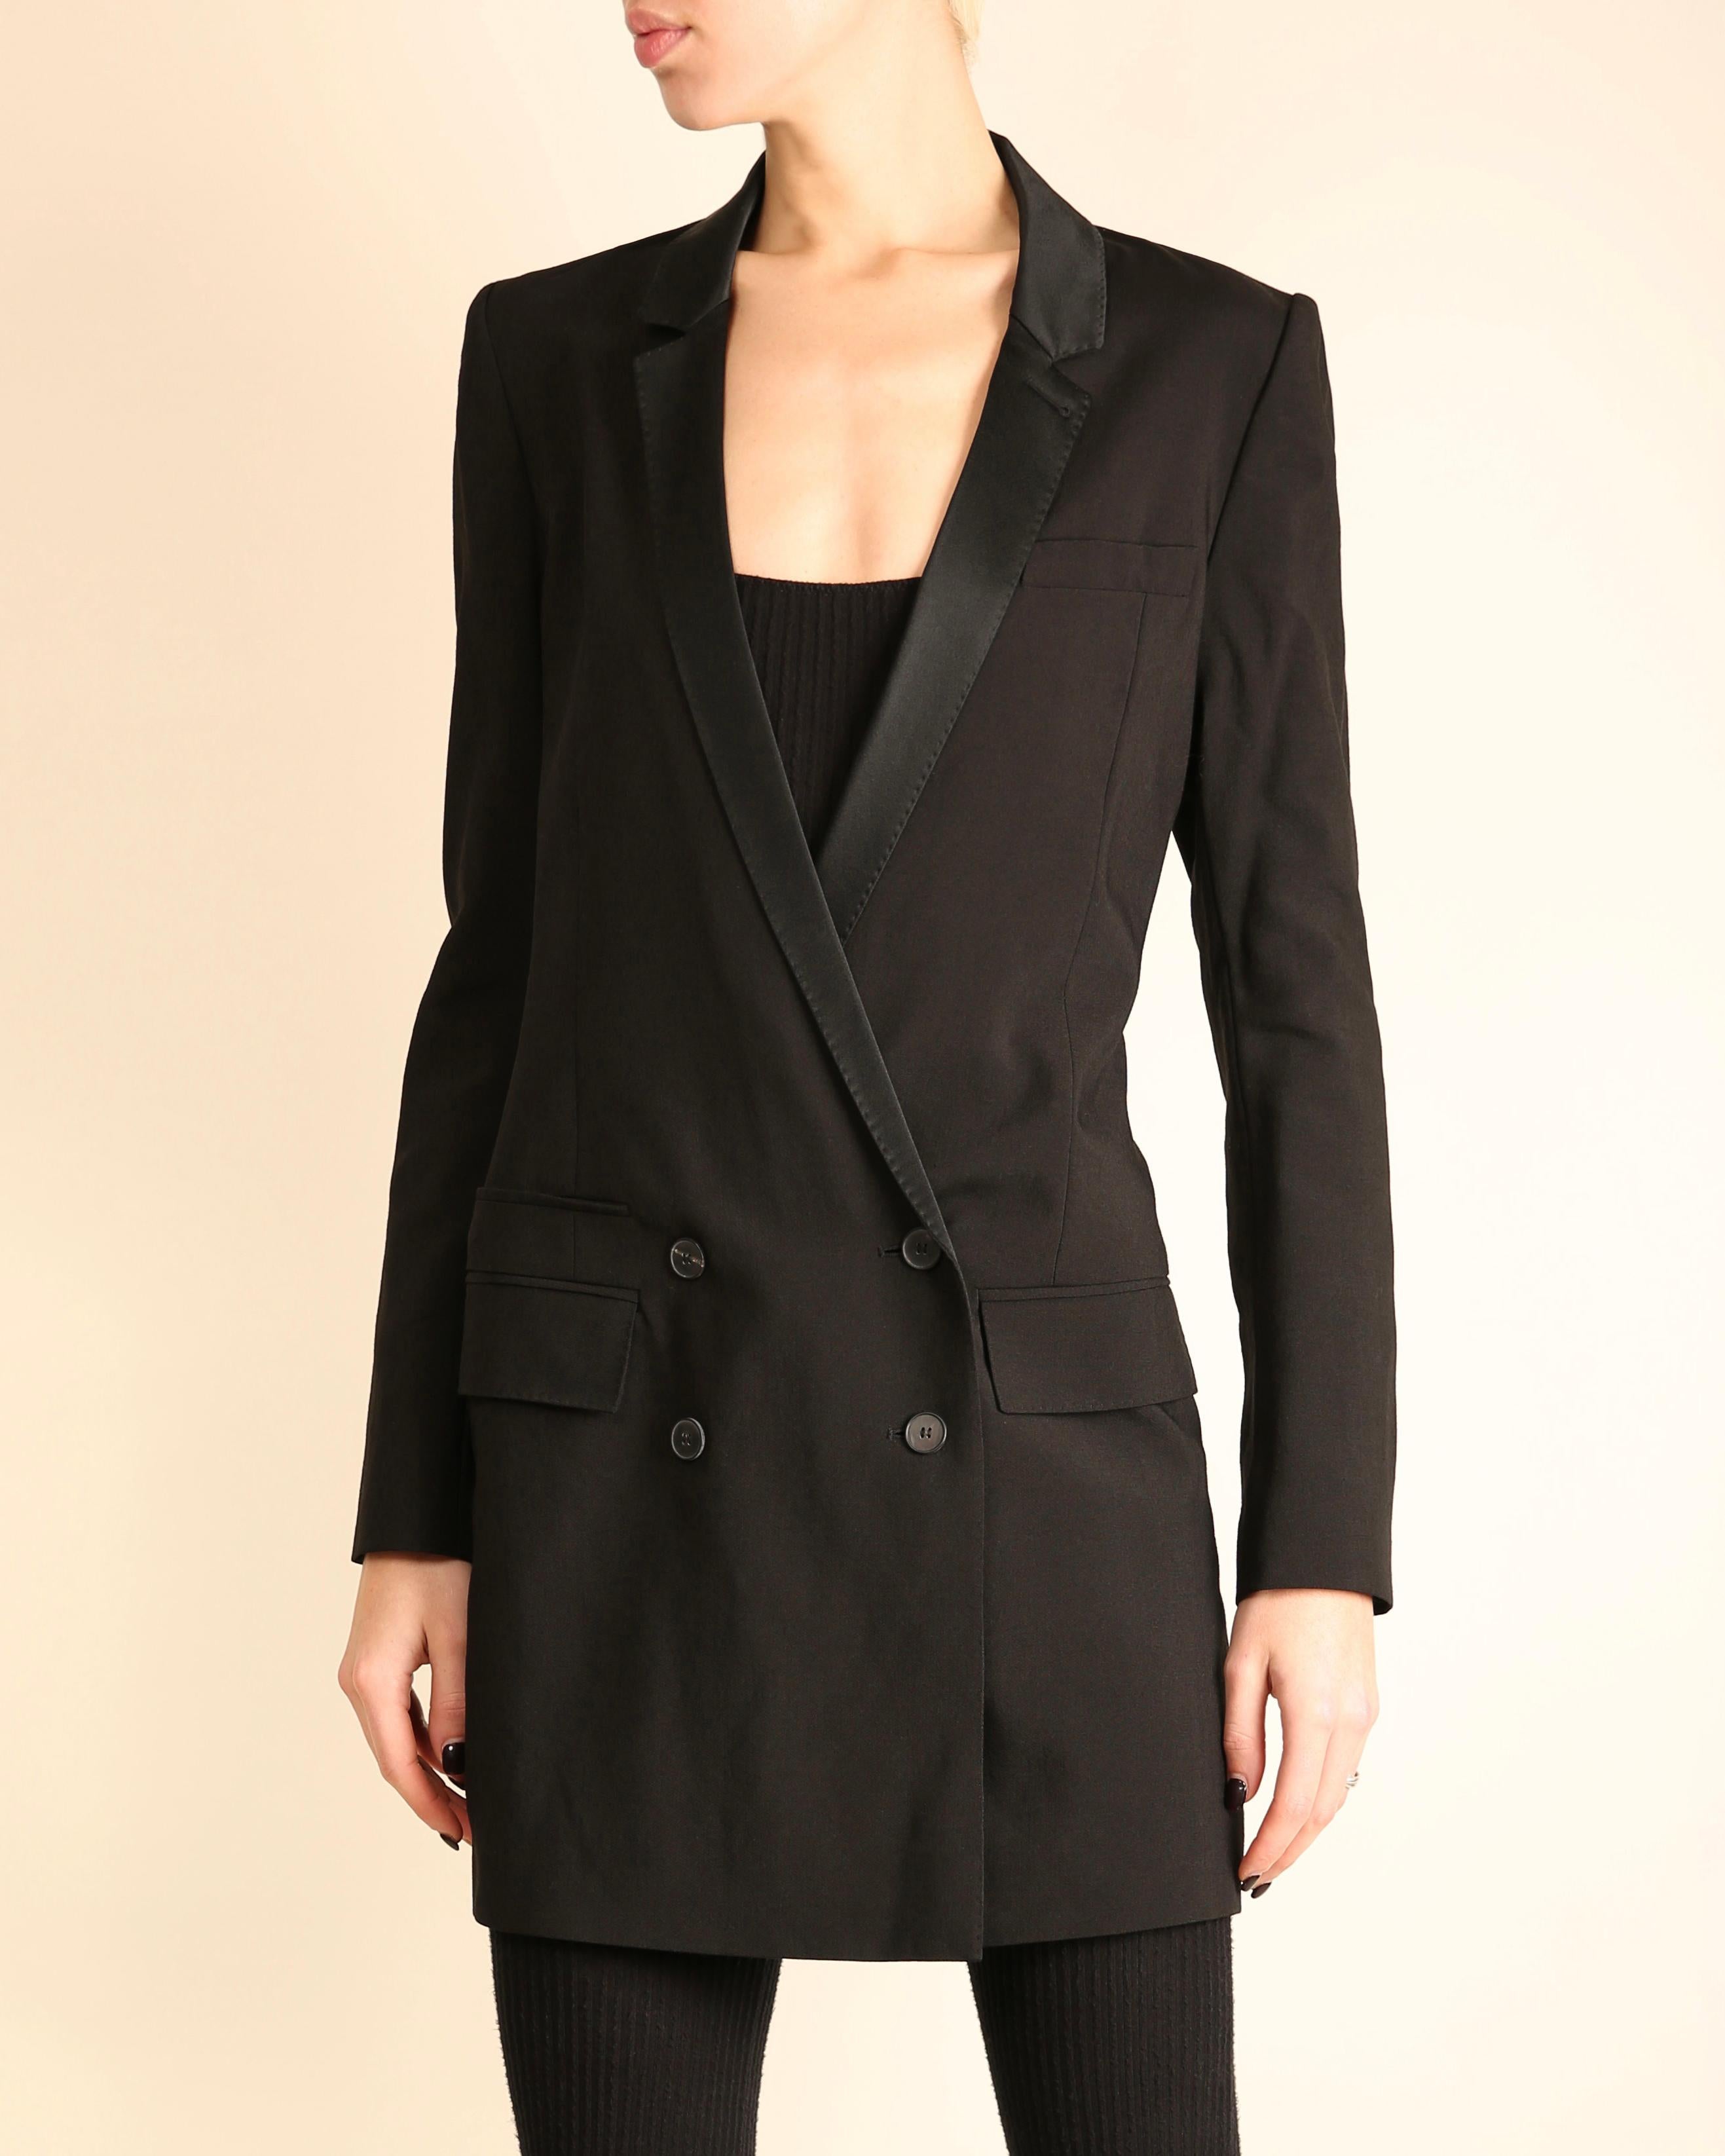 Haider Ackermann tuxedo style blazer or blazer dress 
Satin lapels

SHIPPING - Due to the low item cost of this item, if you would like more cost effective shipping please contact me BEFORE PURCHASE. Direct options are available at lower